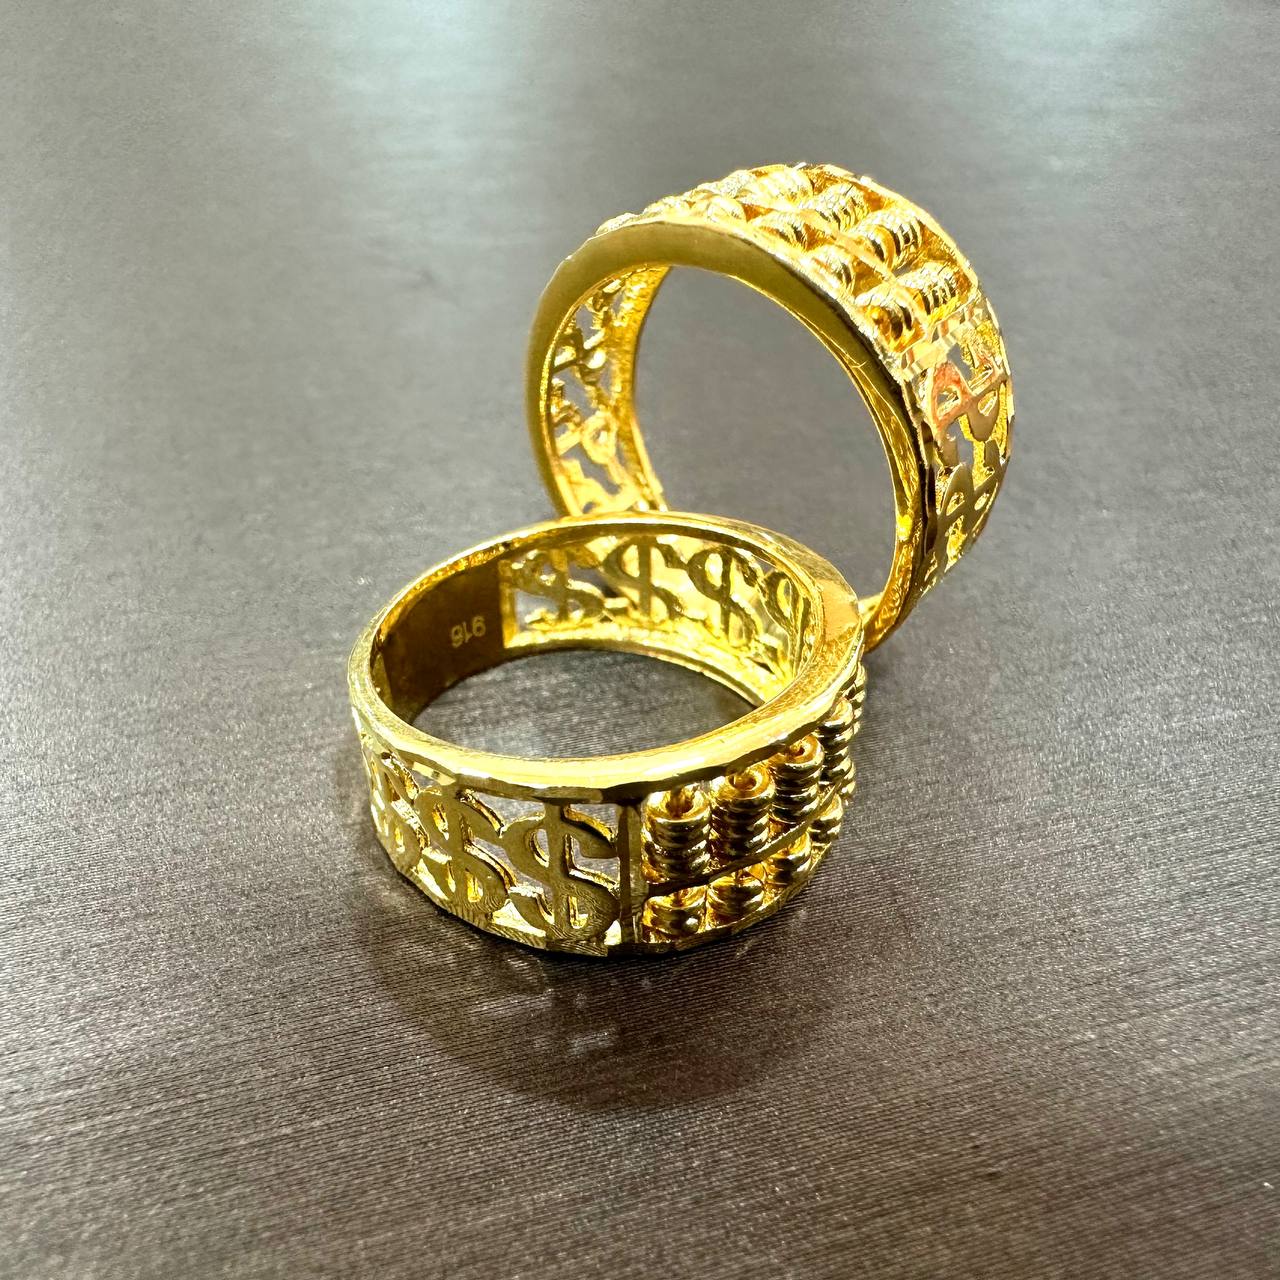 22k / 916 Gold Half Abacus with Dollar sign Ring-Rings-Best Gold Shop